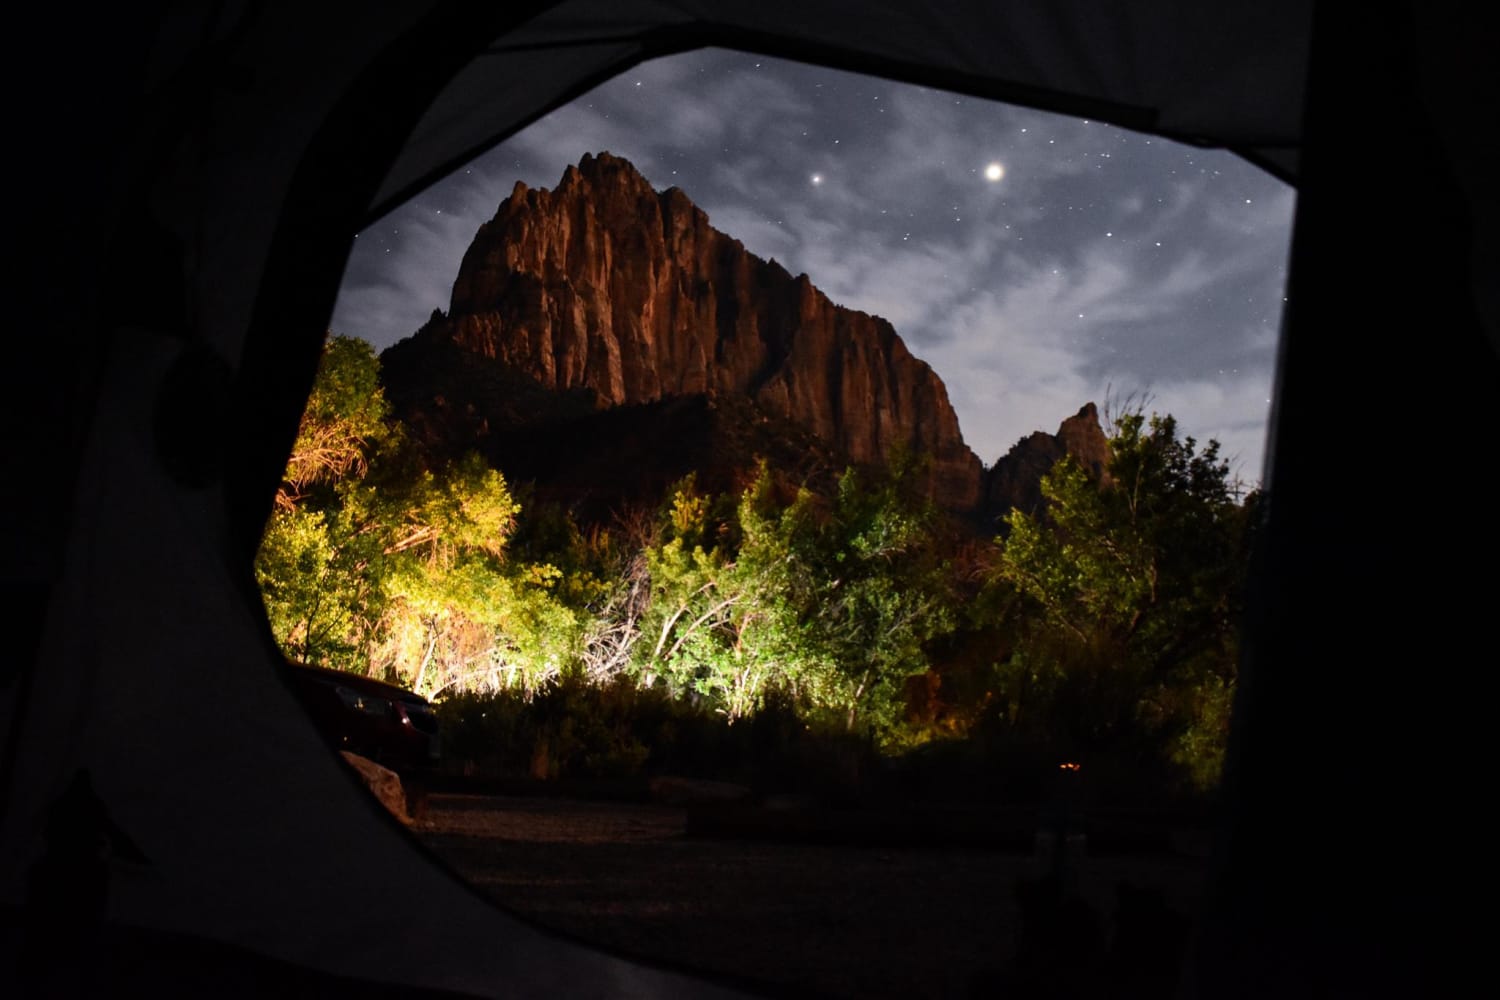 Views from my tent at Zion National Park!